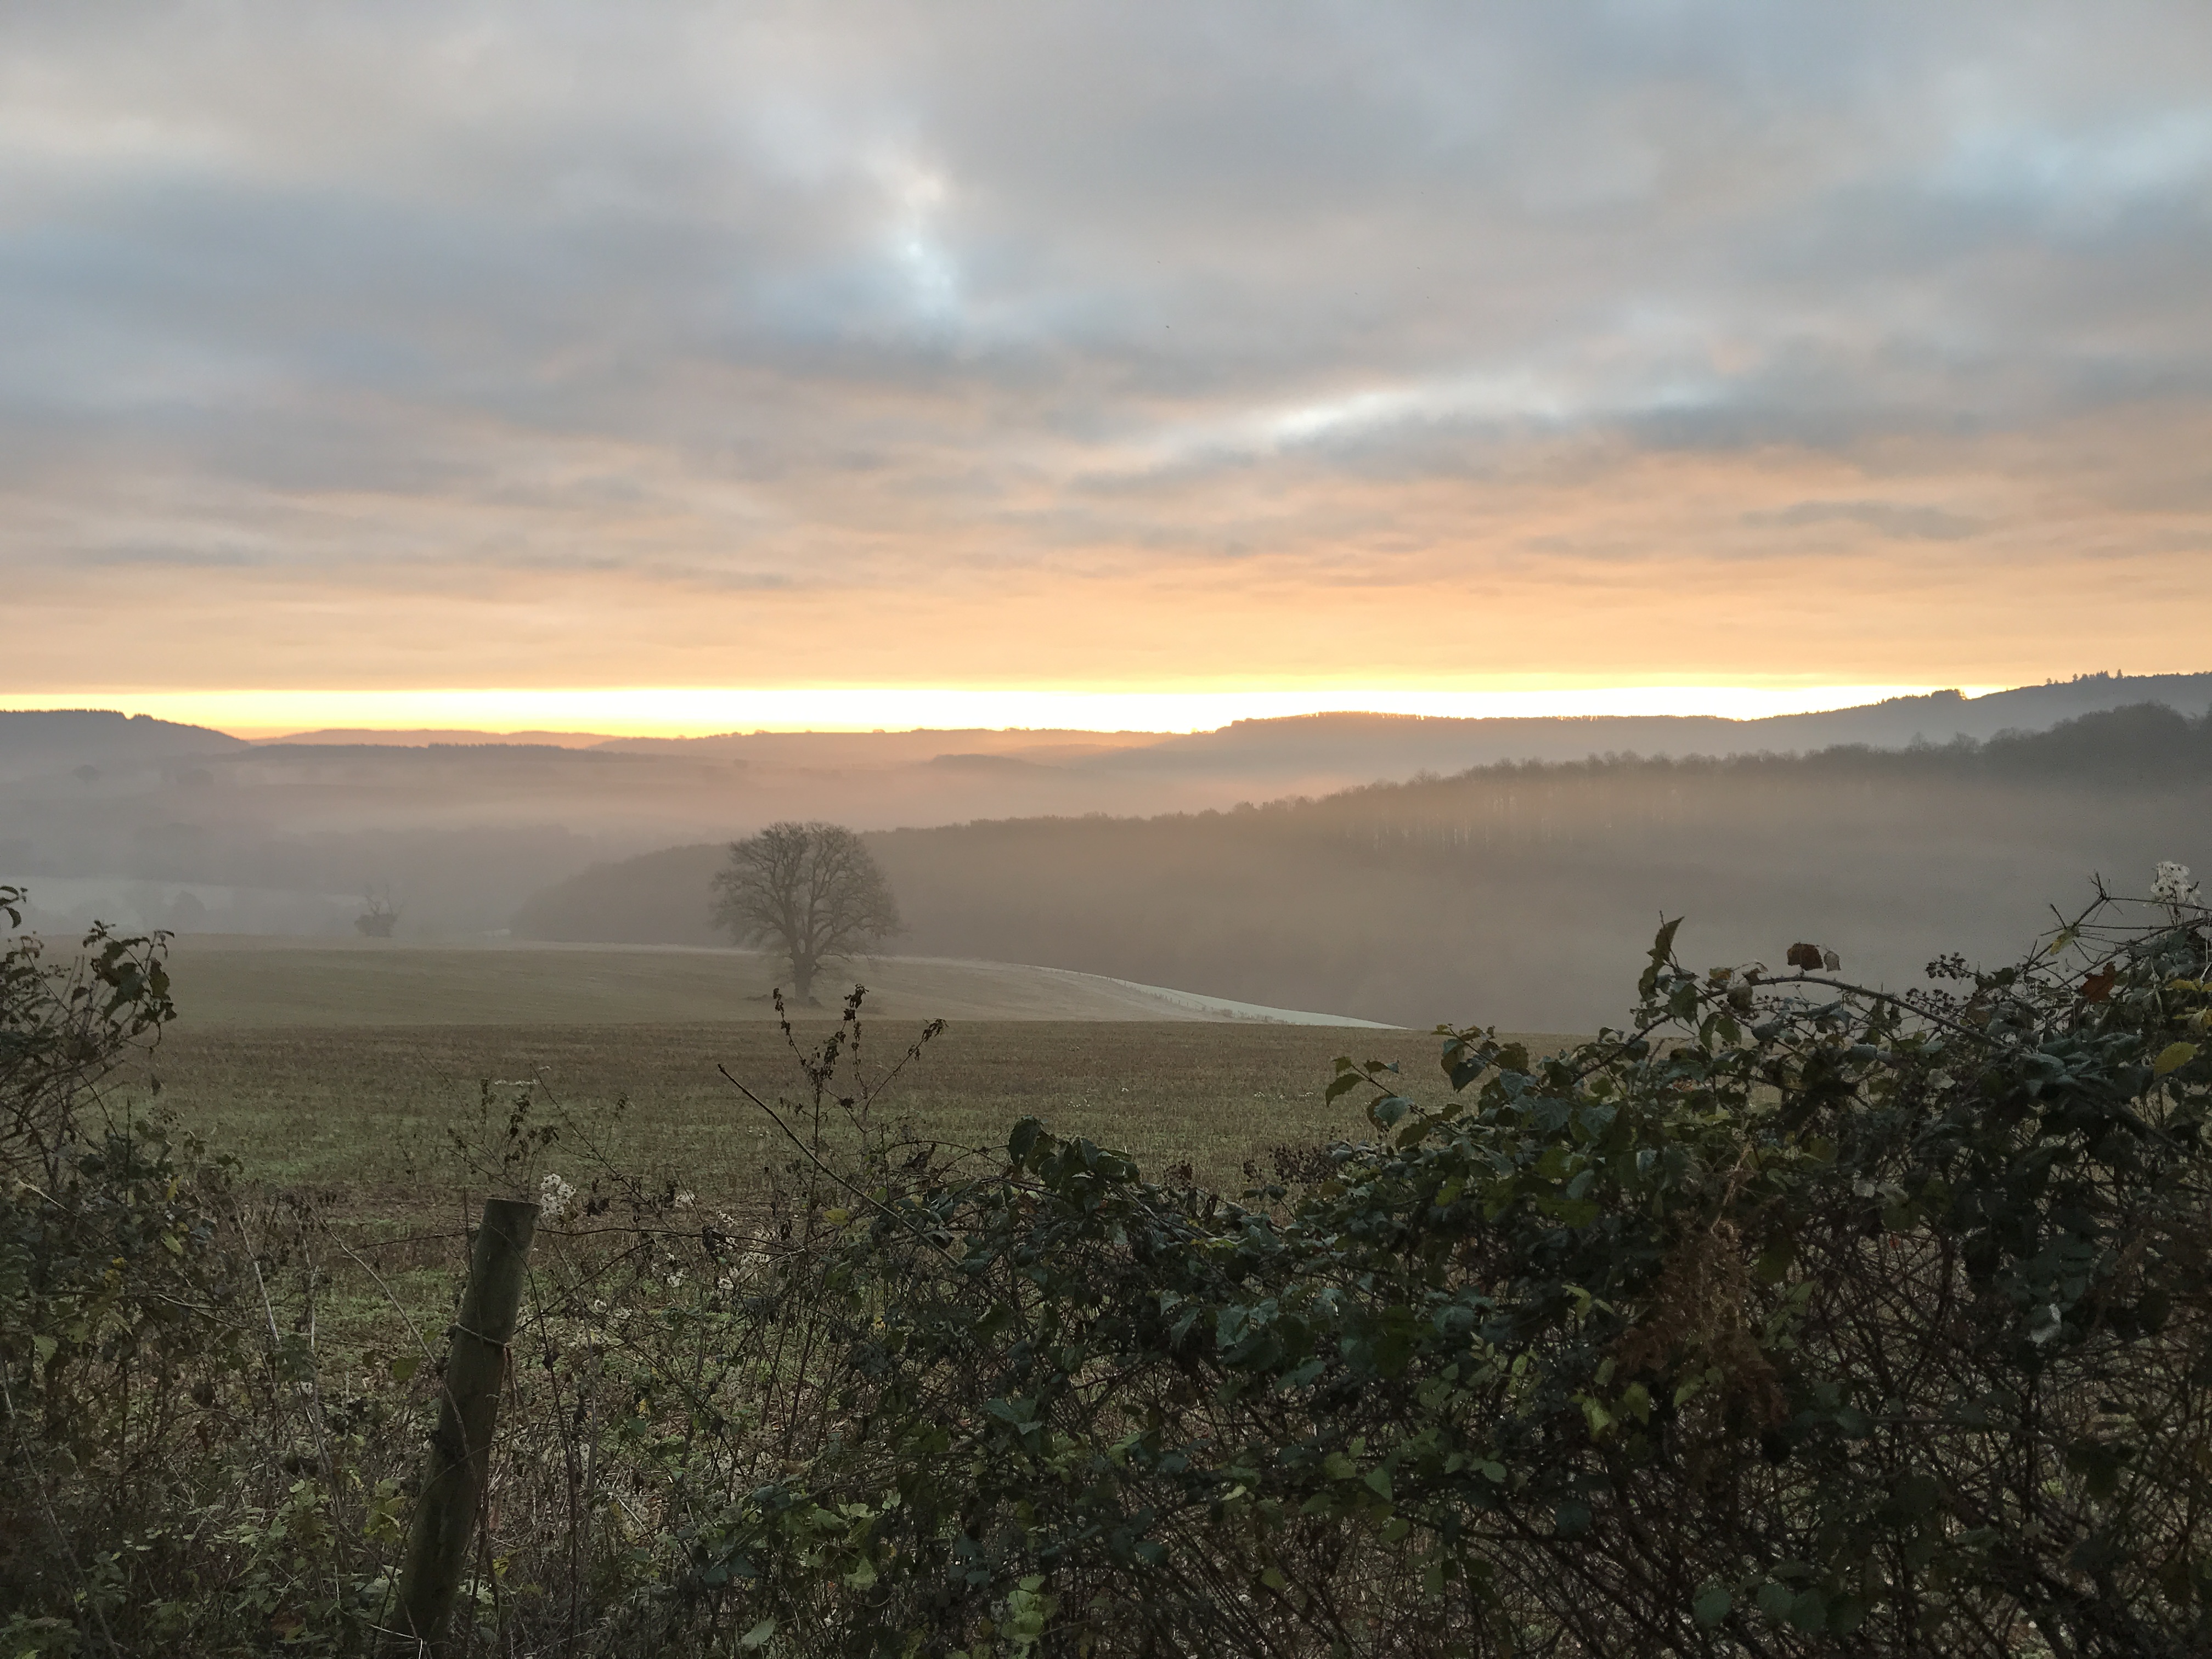 Early morning view of the Wye Valley from Llanishen